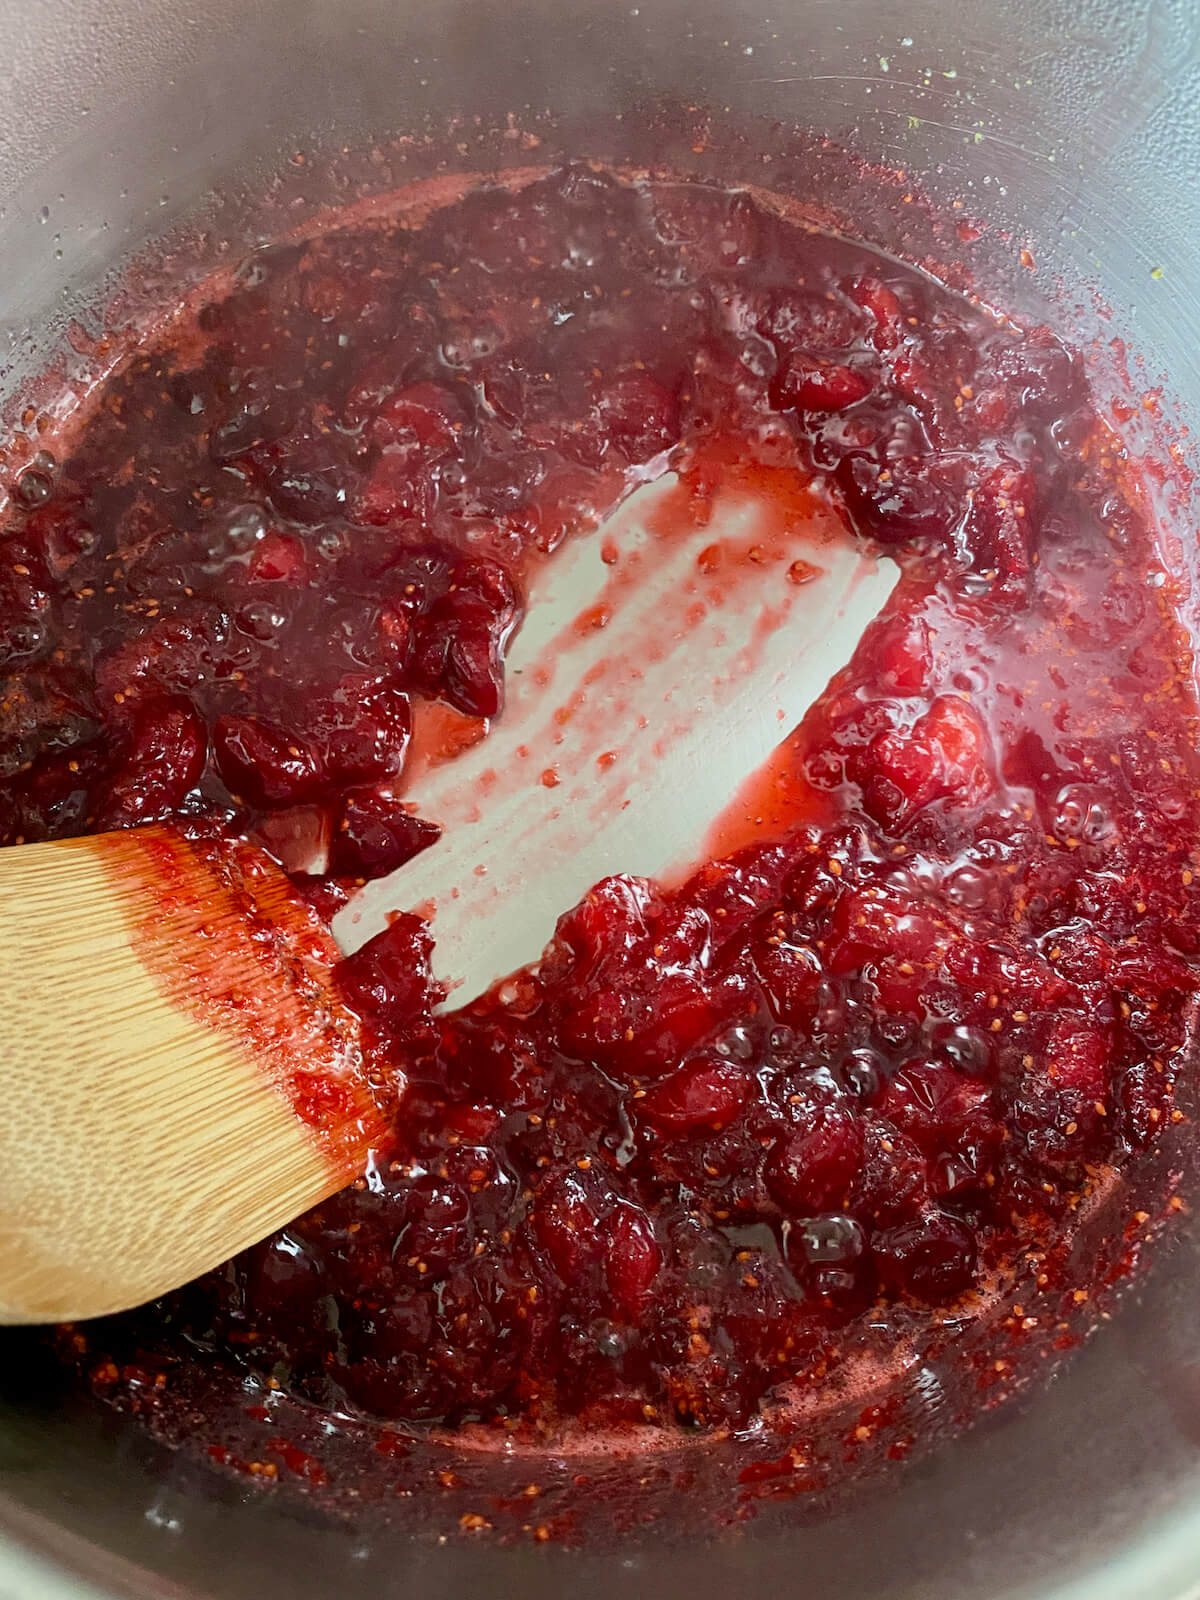 Homemade orange cranberry sauce thickened in a saucepan. There is a wooden spoon running through the sauce, revealing the bottom of the pot.